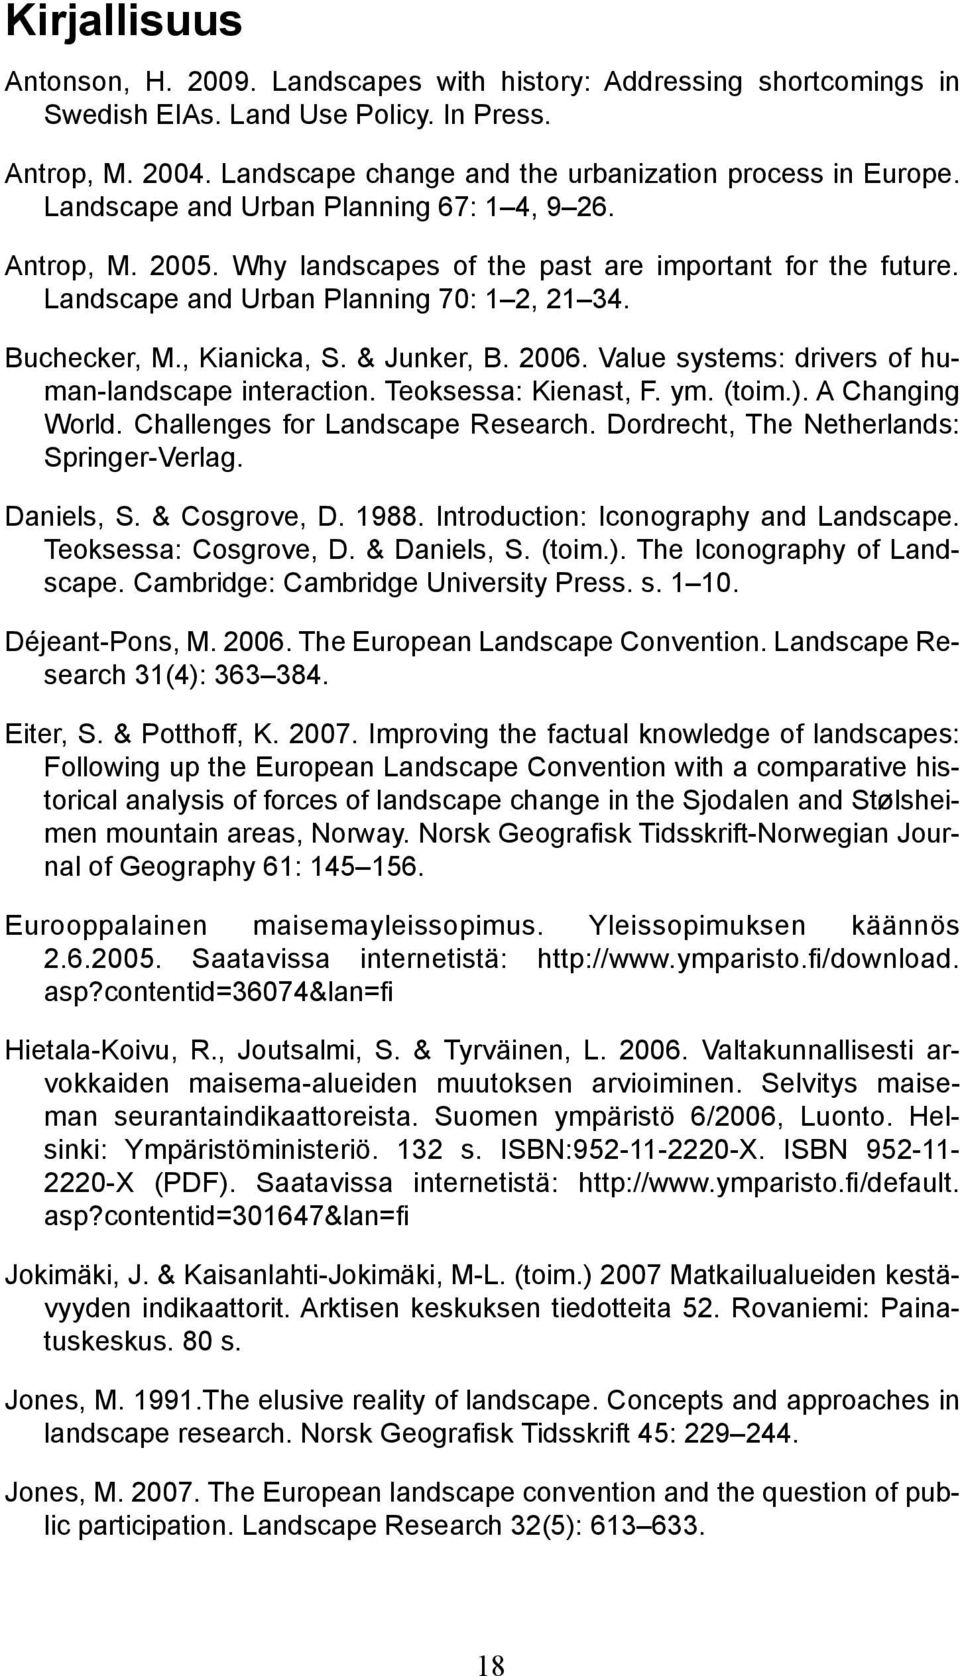 & Junker, B. 2006. Value systems: drivers of human-landscape interaction. Teoksessa: Kienast, F. ym. (toim.). A Changing World. Challenges for Landscape Research.